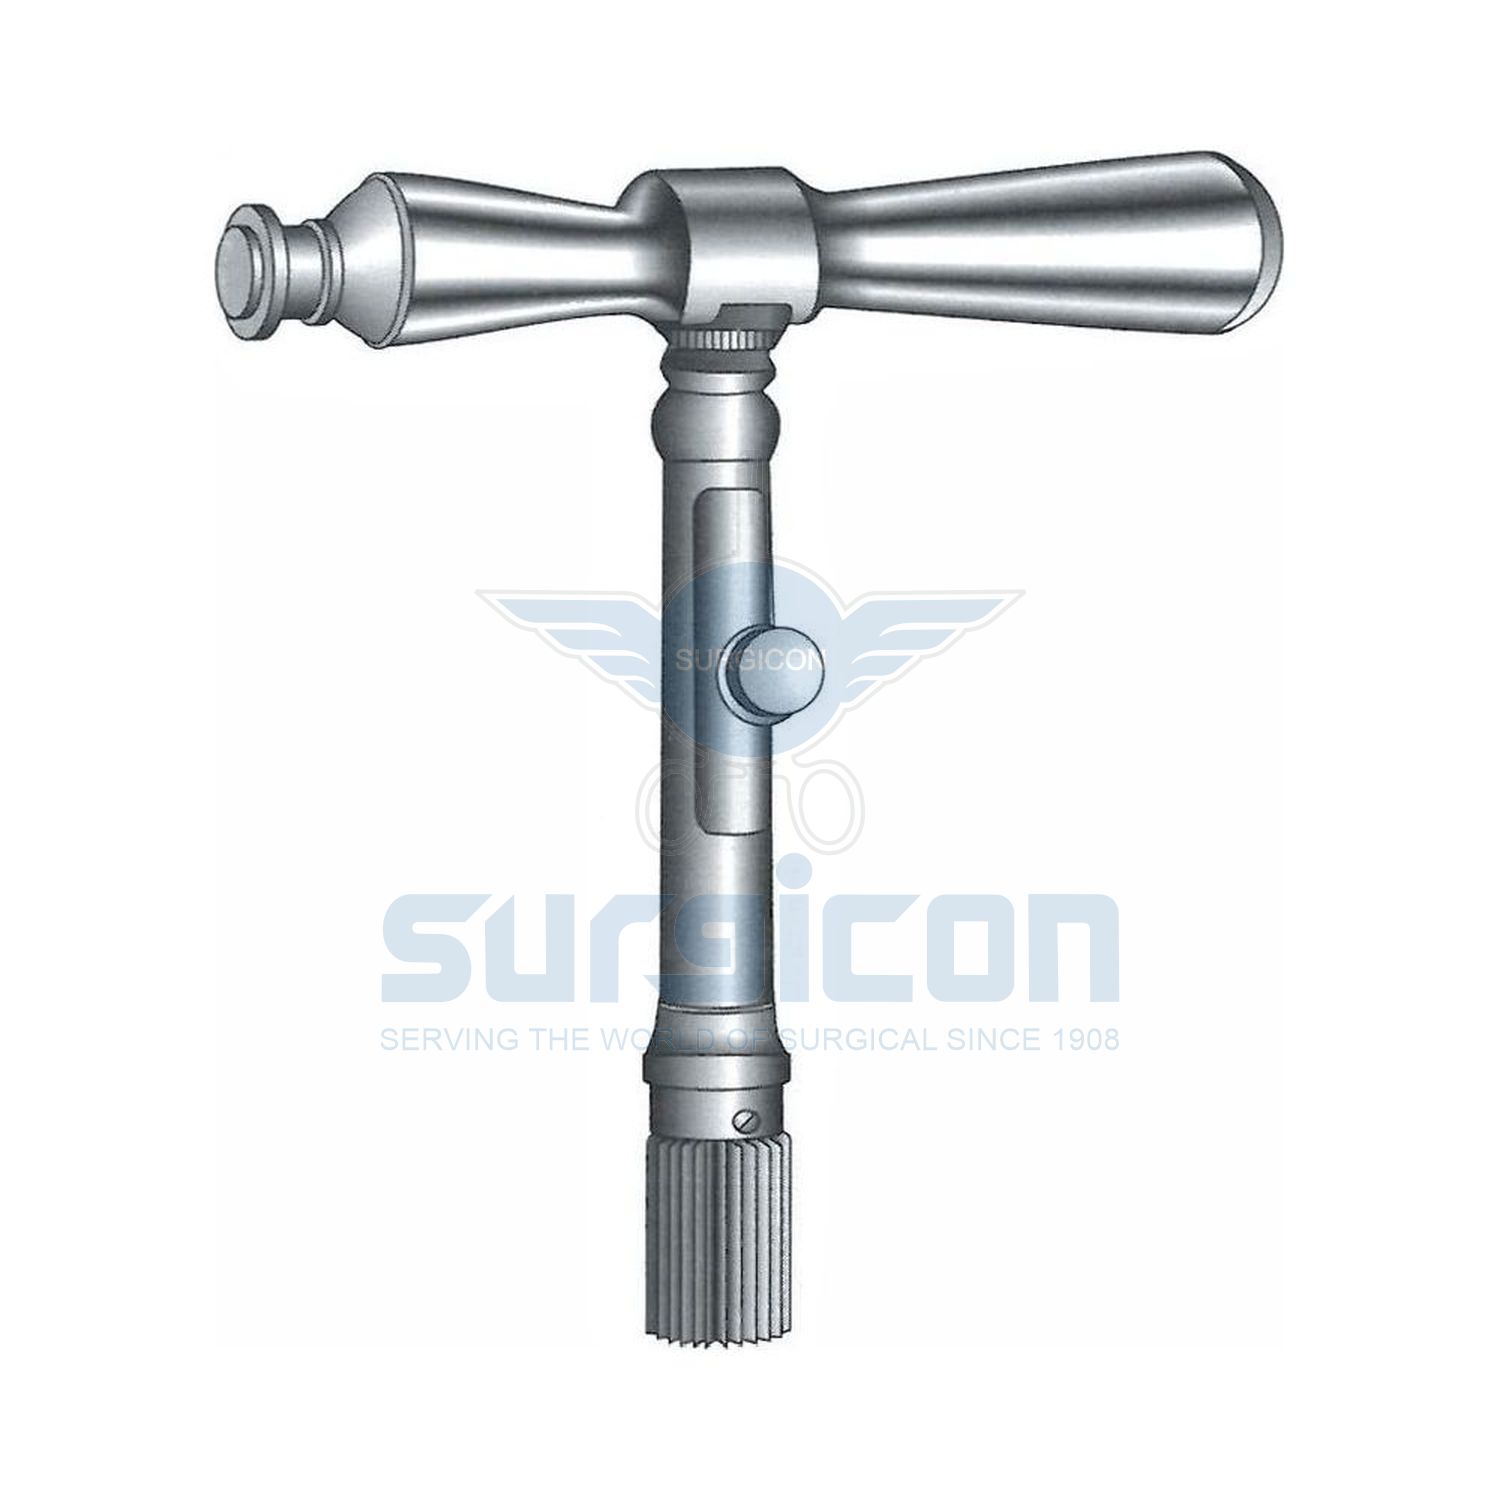 Hudson-Cervical-Traction-Tongs-and-Drill-Point-J-25-052